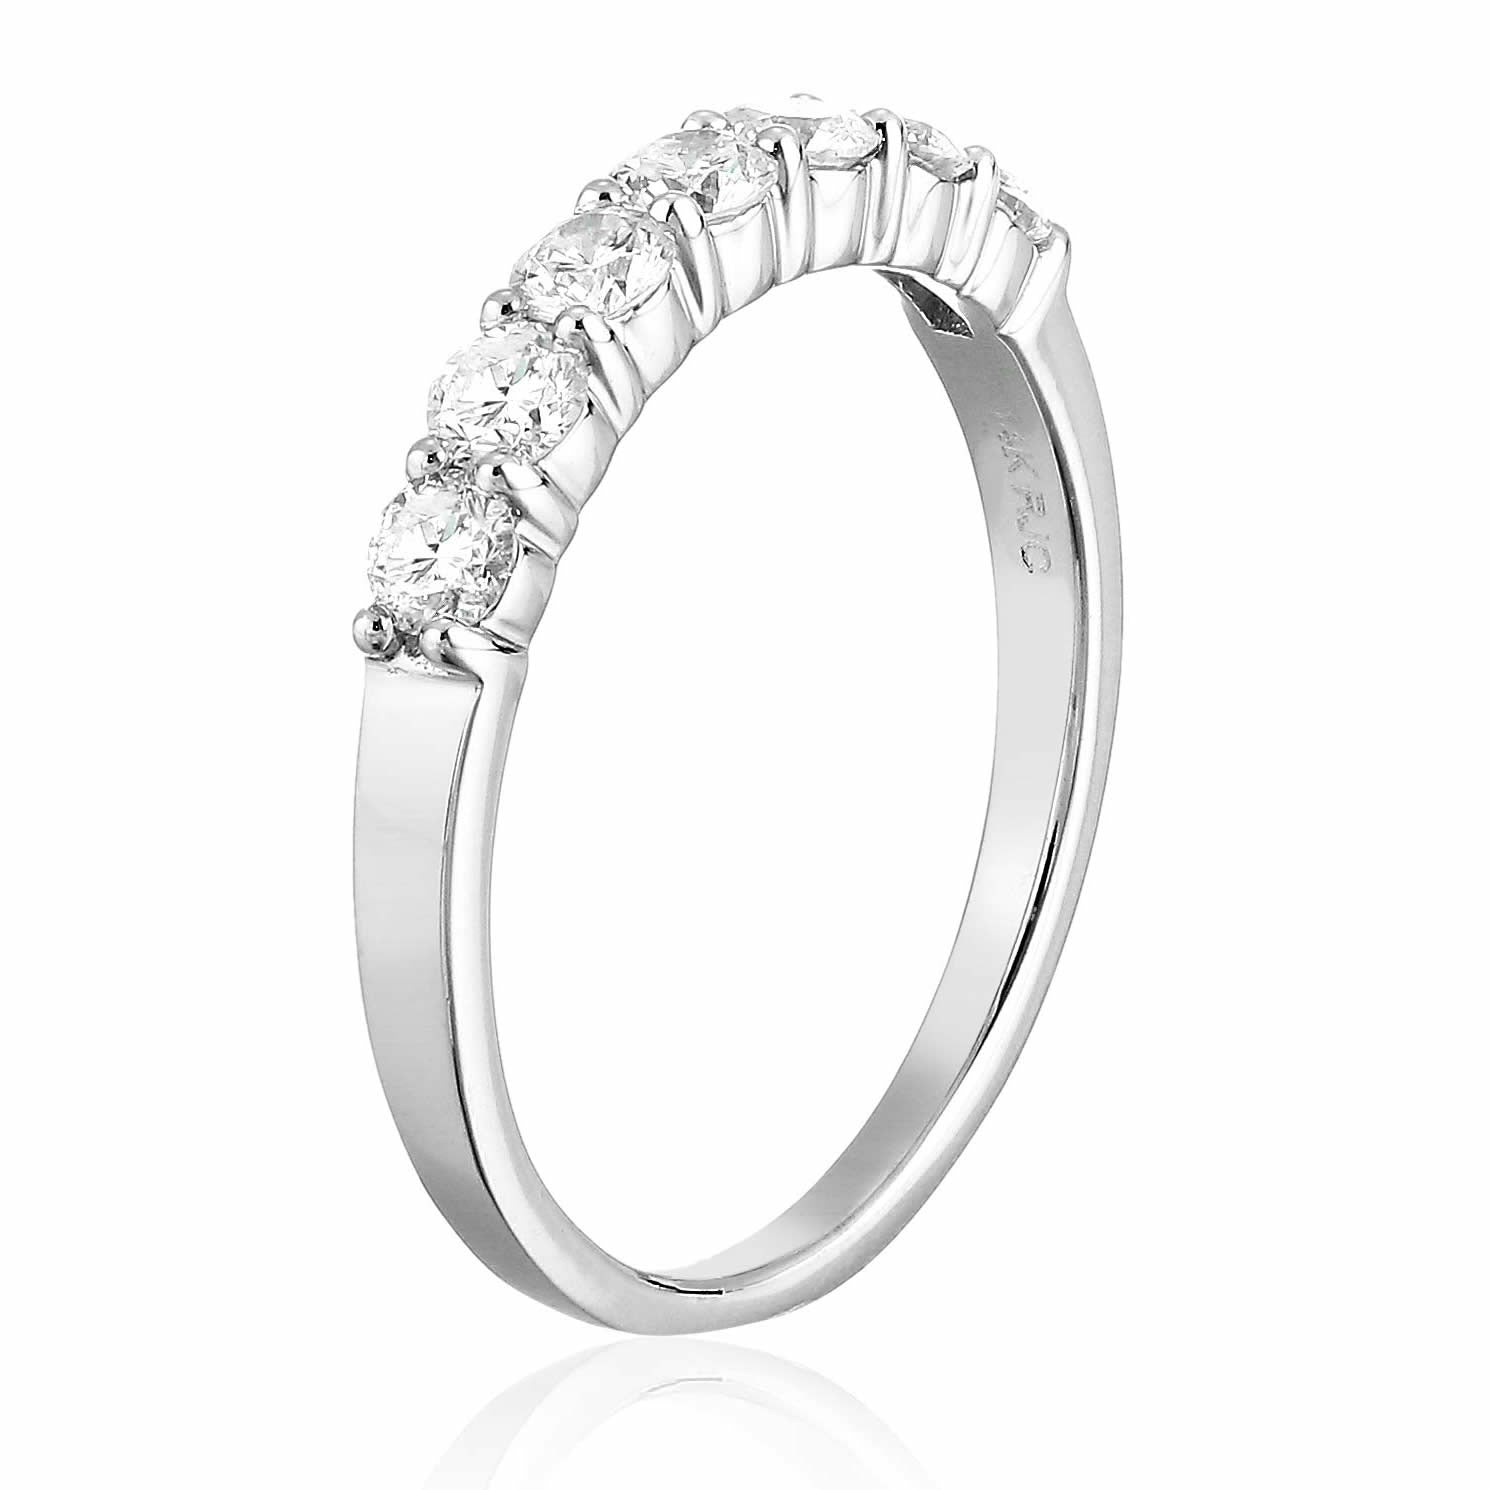 1/2 cttw Diamond Wedding Band for Women, Certified SI1-SI2 Diamond Wedding Band in 14K White Gold 7 Stones, Size 4.5-10